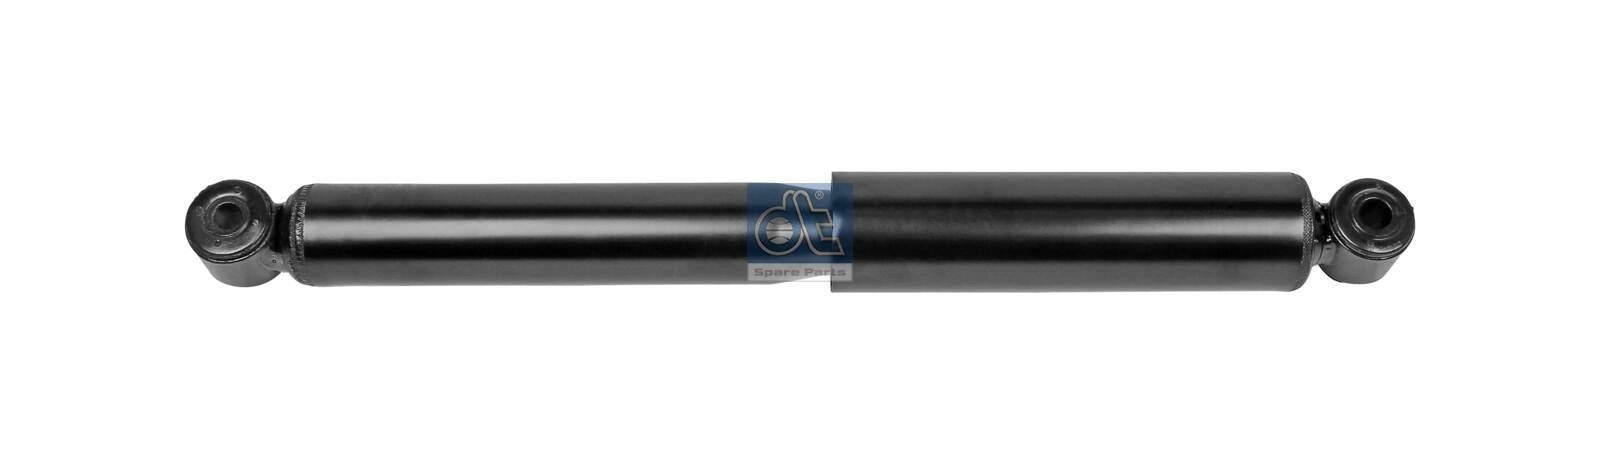 Mercedes VIANO Shock absorbers 8306009 DT Spare Parts 4.66594 online buy